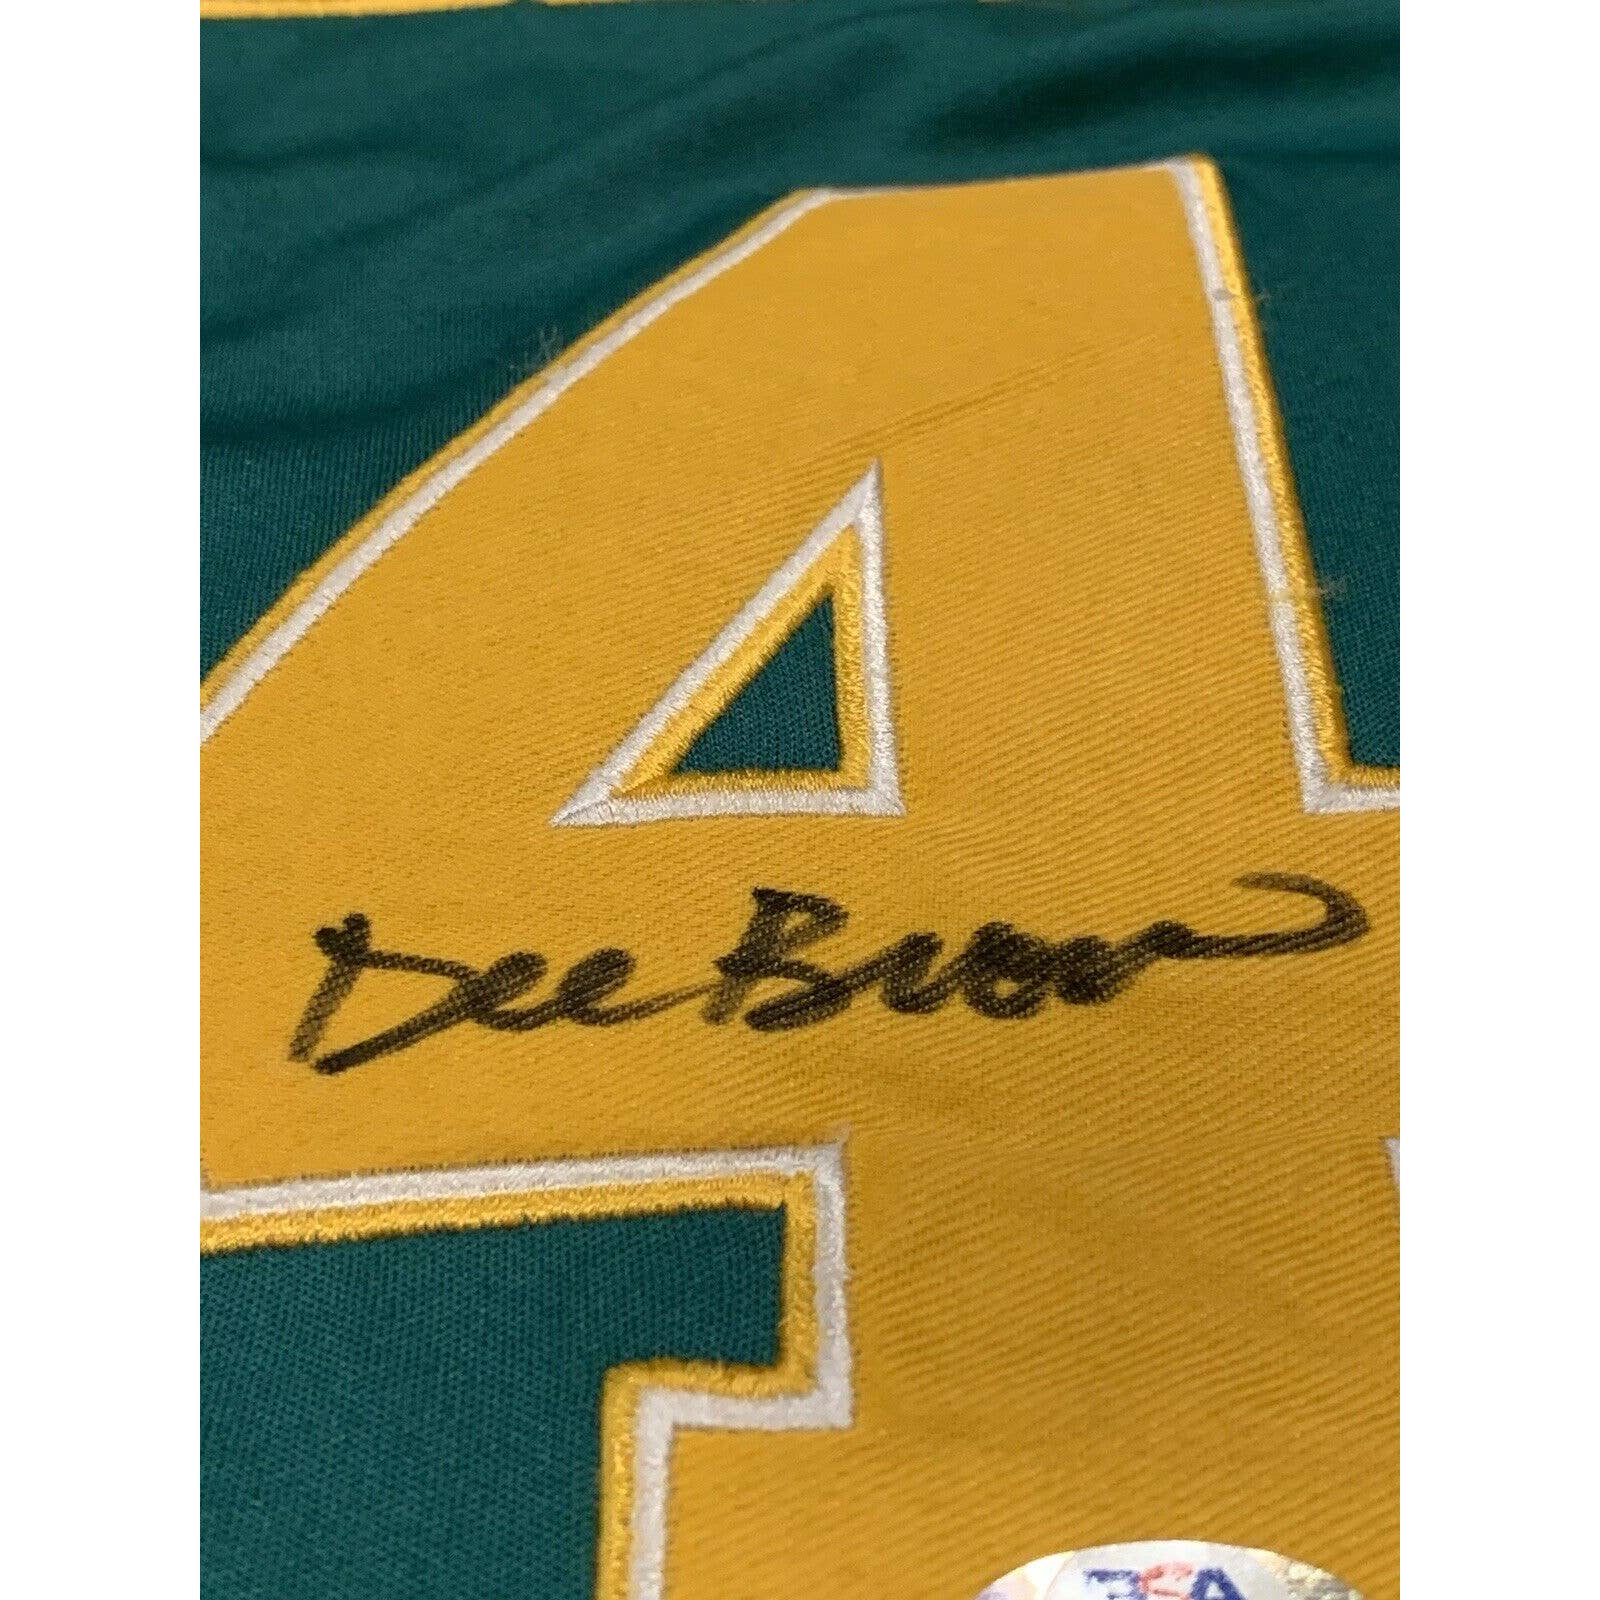 Dee Brown Autographed/Signed Jersey PSA/DNA Jacksonville Dolphins University - TreasuresEvolved